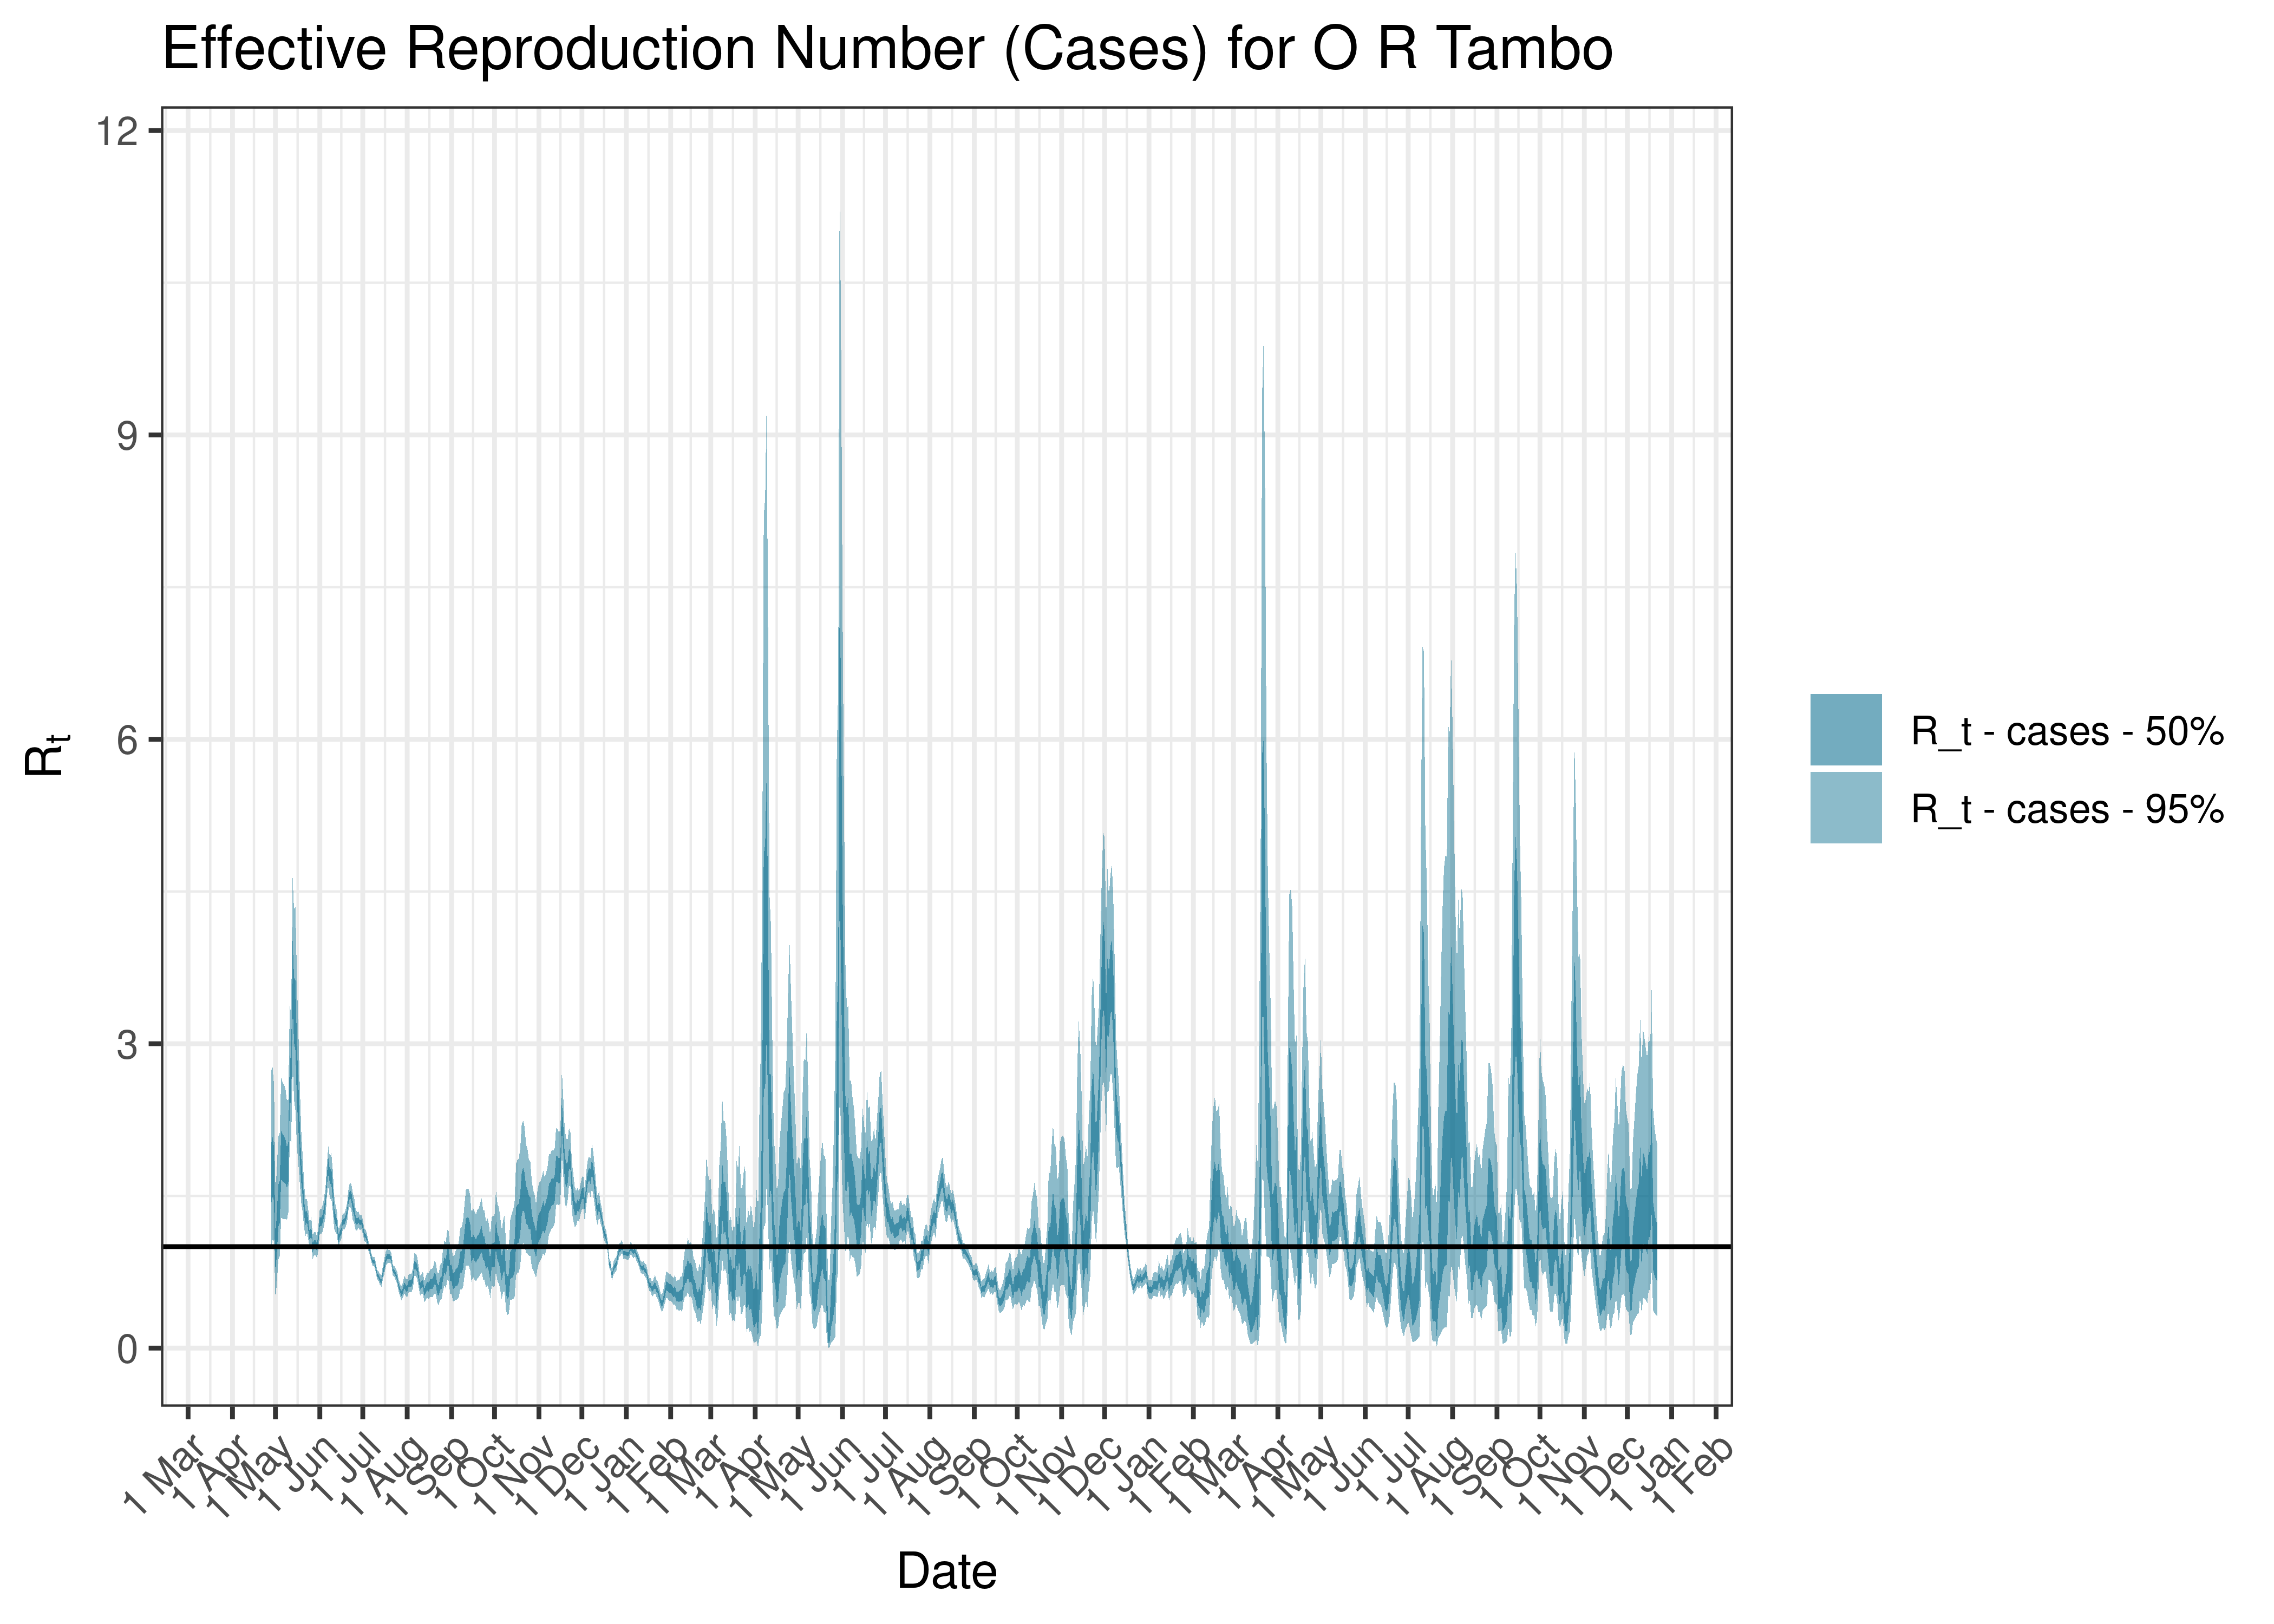 Estimated Effective Reproduction Number Based on Cases for O R Tambo since 1 April 2020